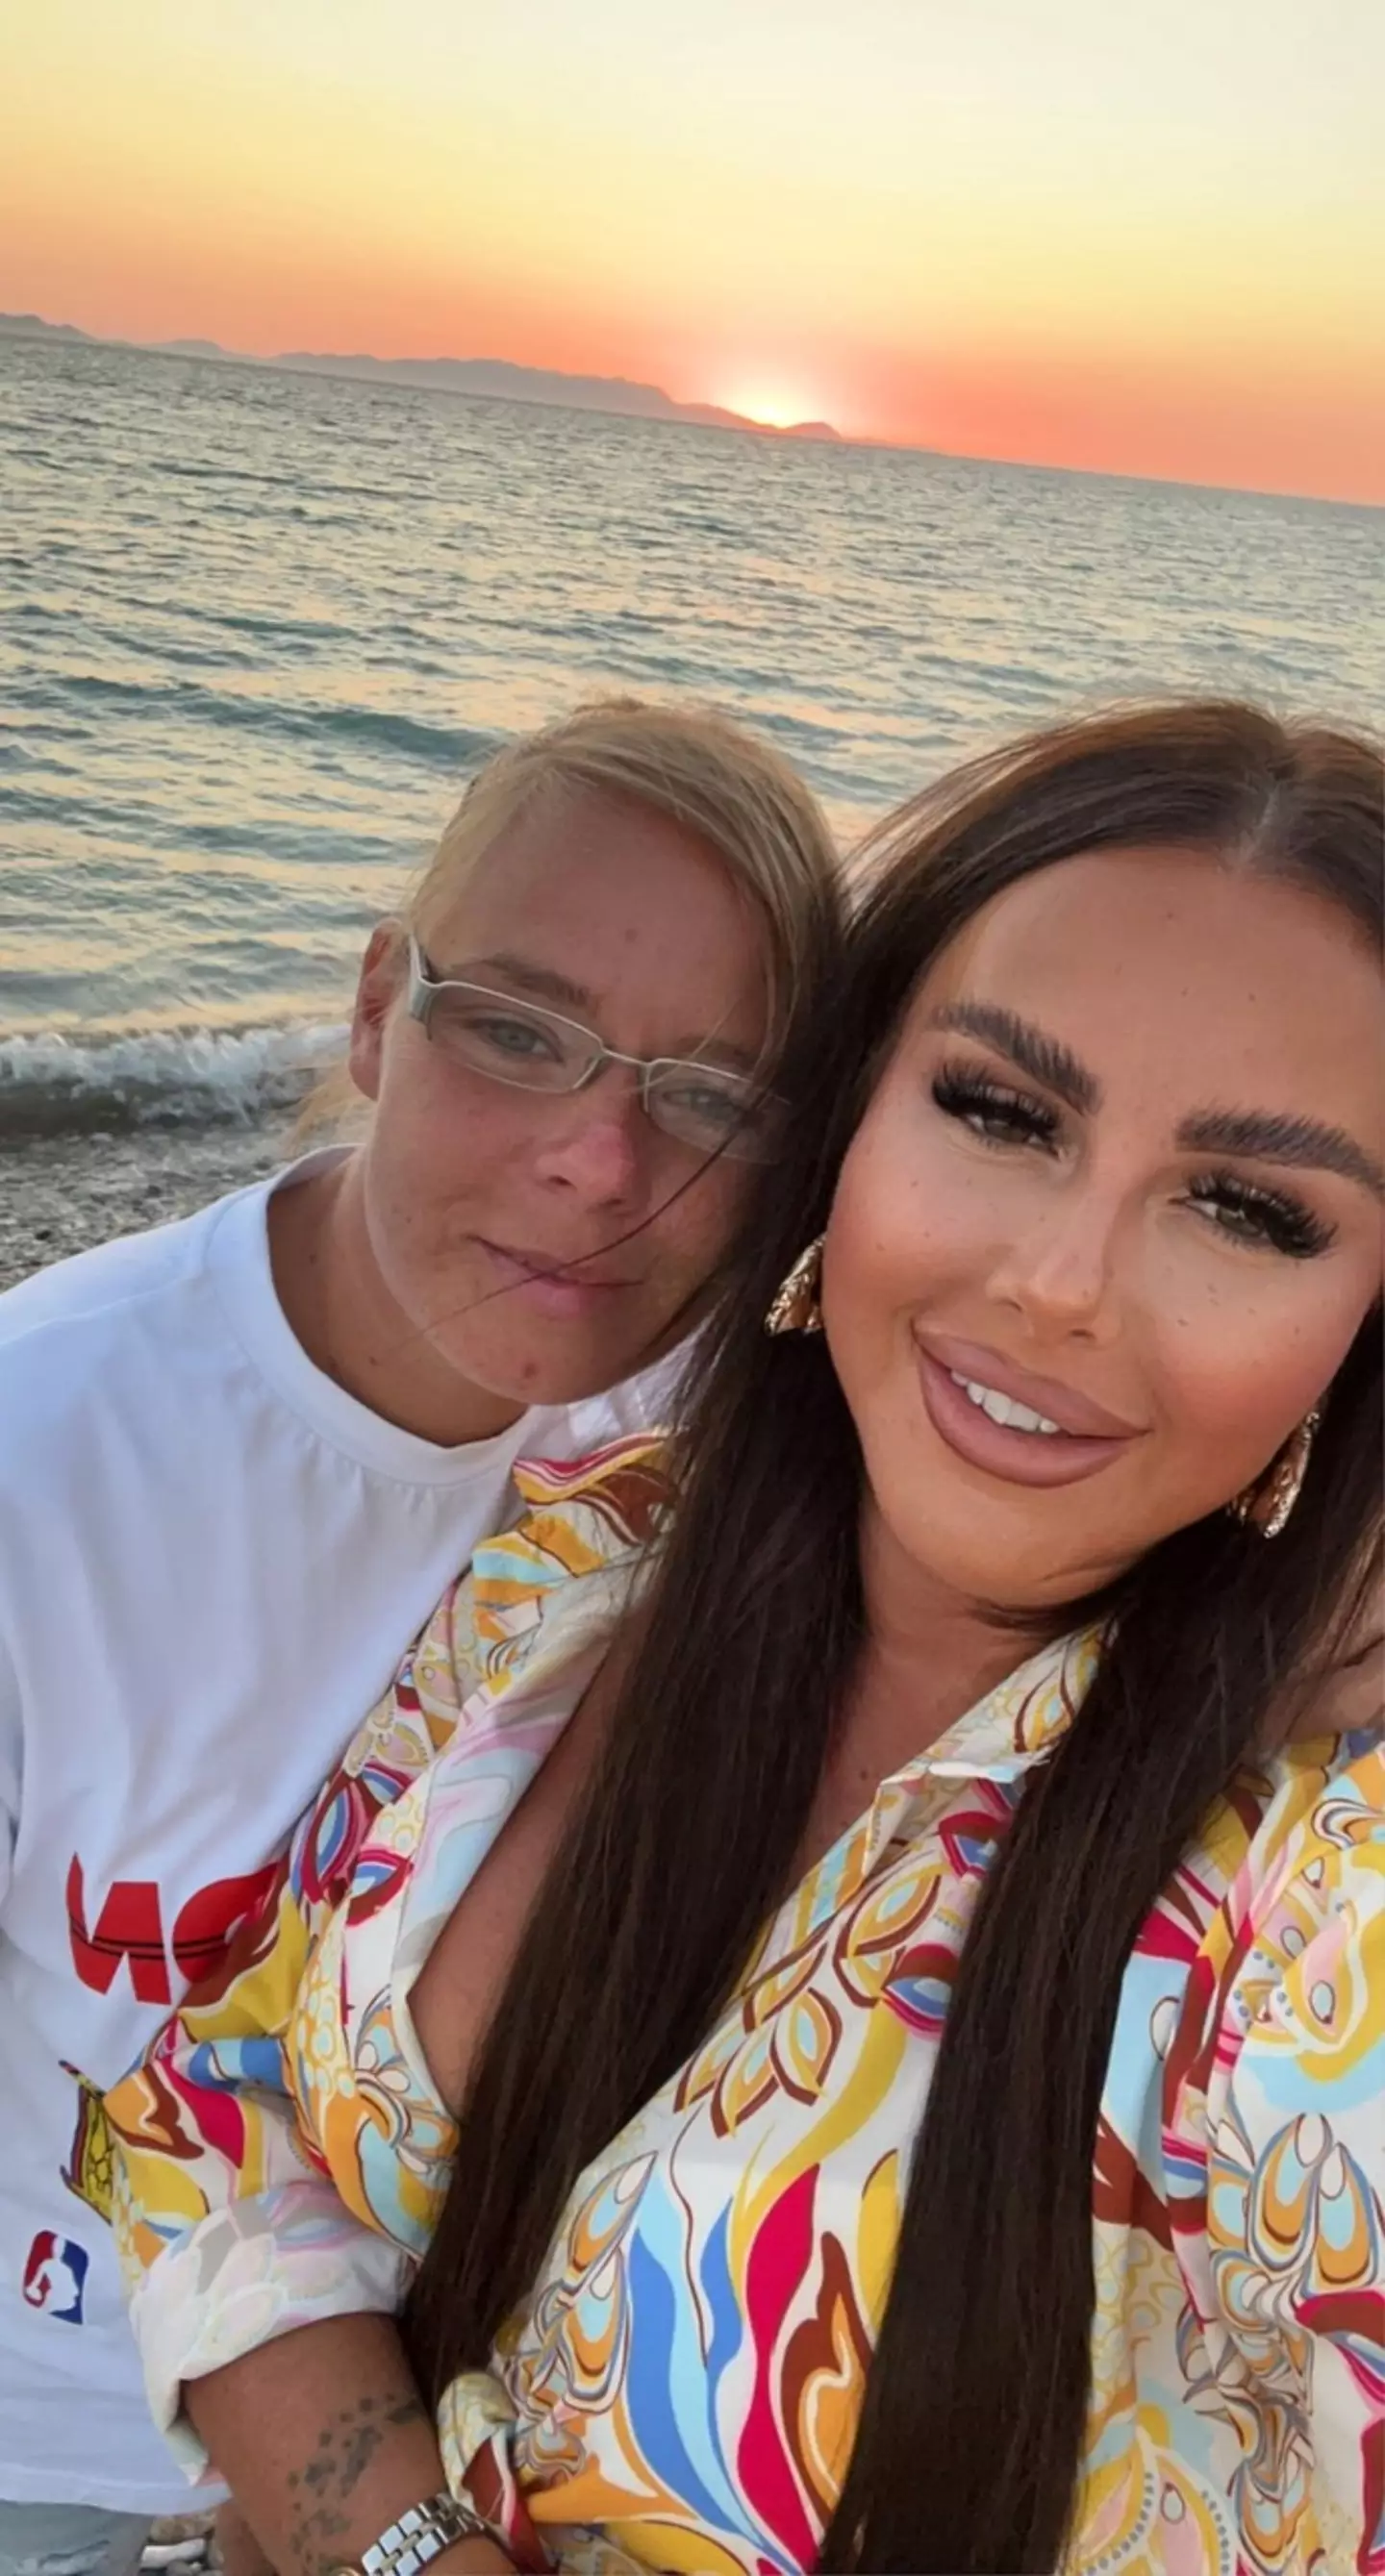 Jade Tushingham, 32, and her partner Kelly Tushingham, 30 flew to Antalya, Turkey last September with the hopes of taking advantage of cheaper dental prices.